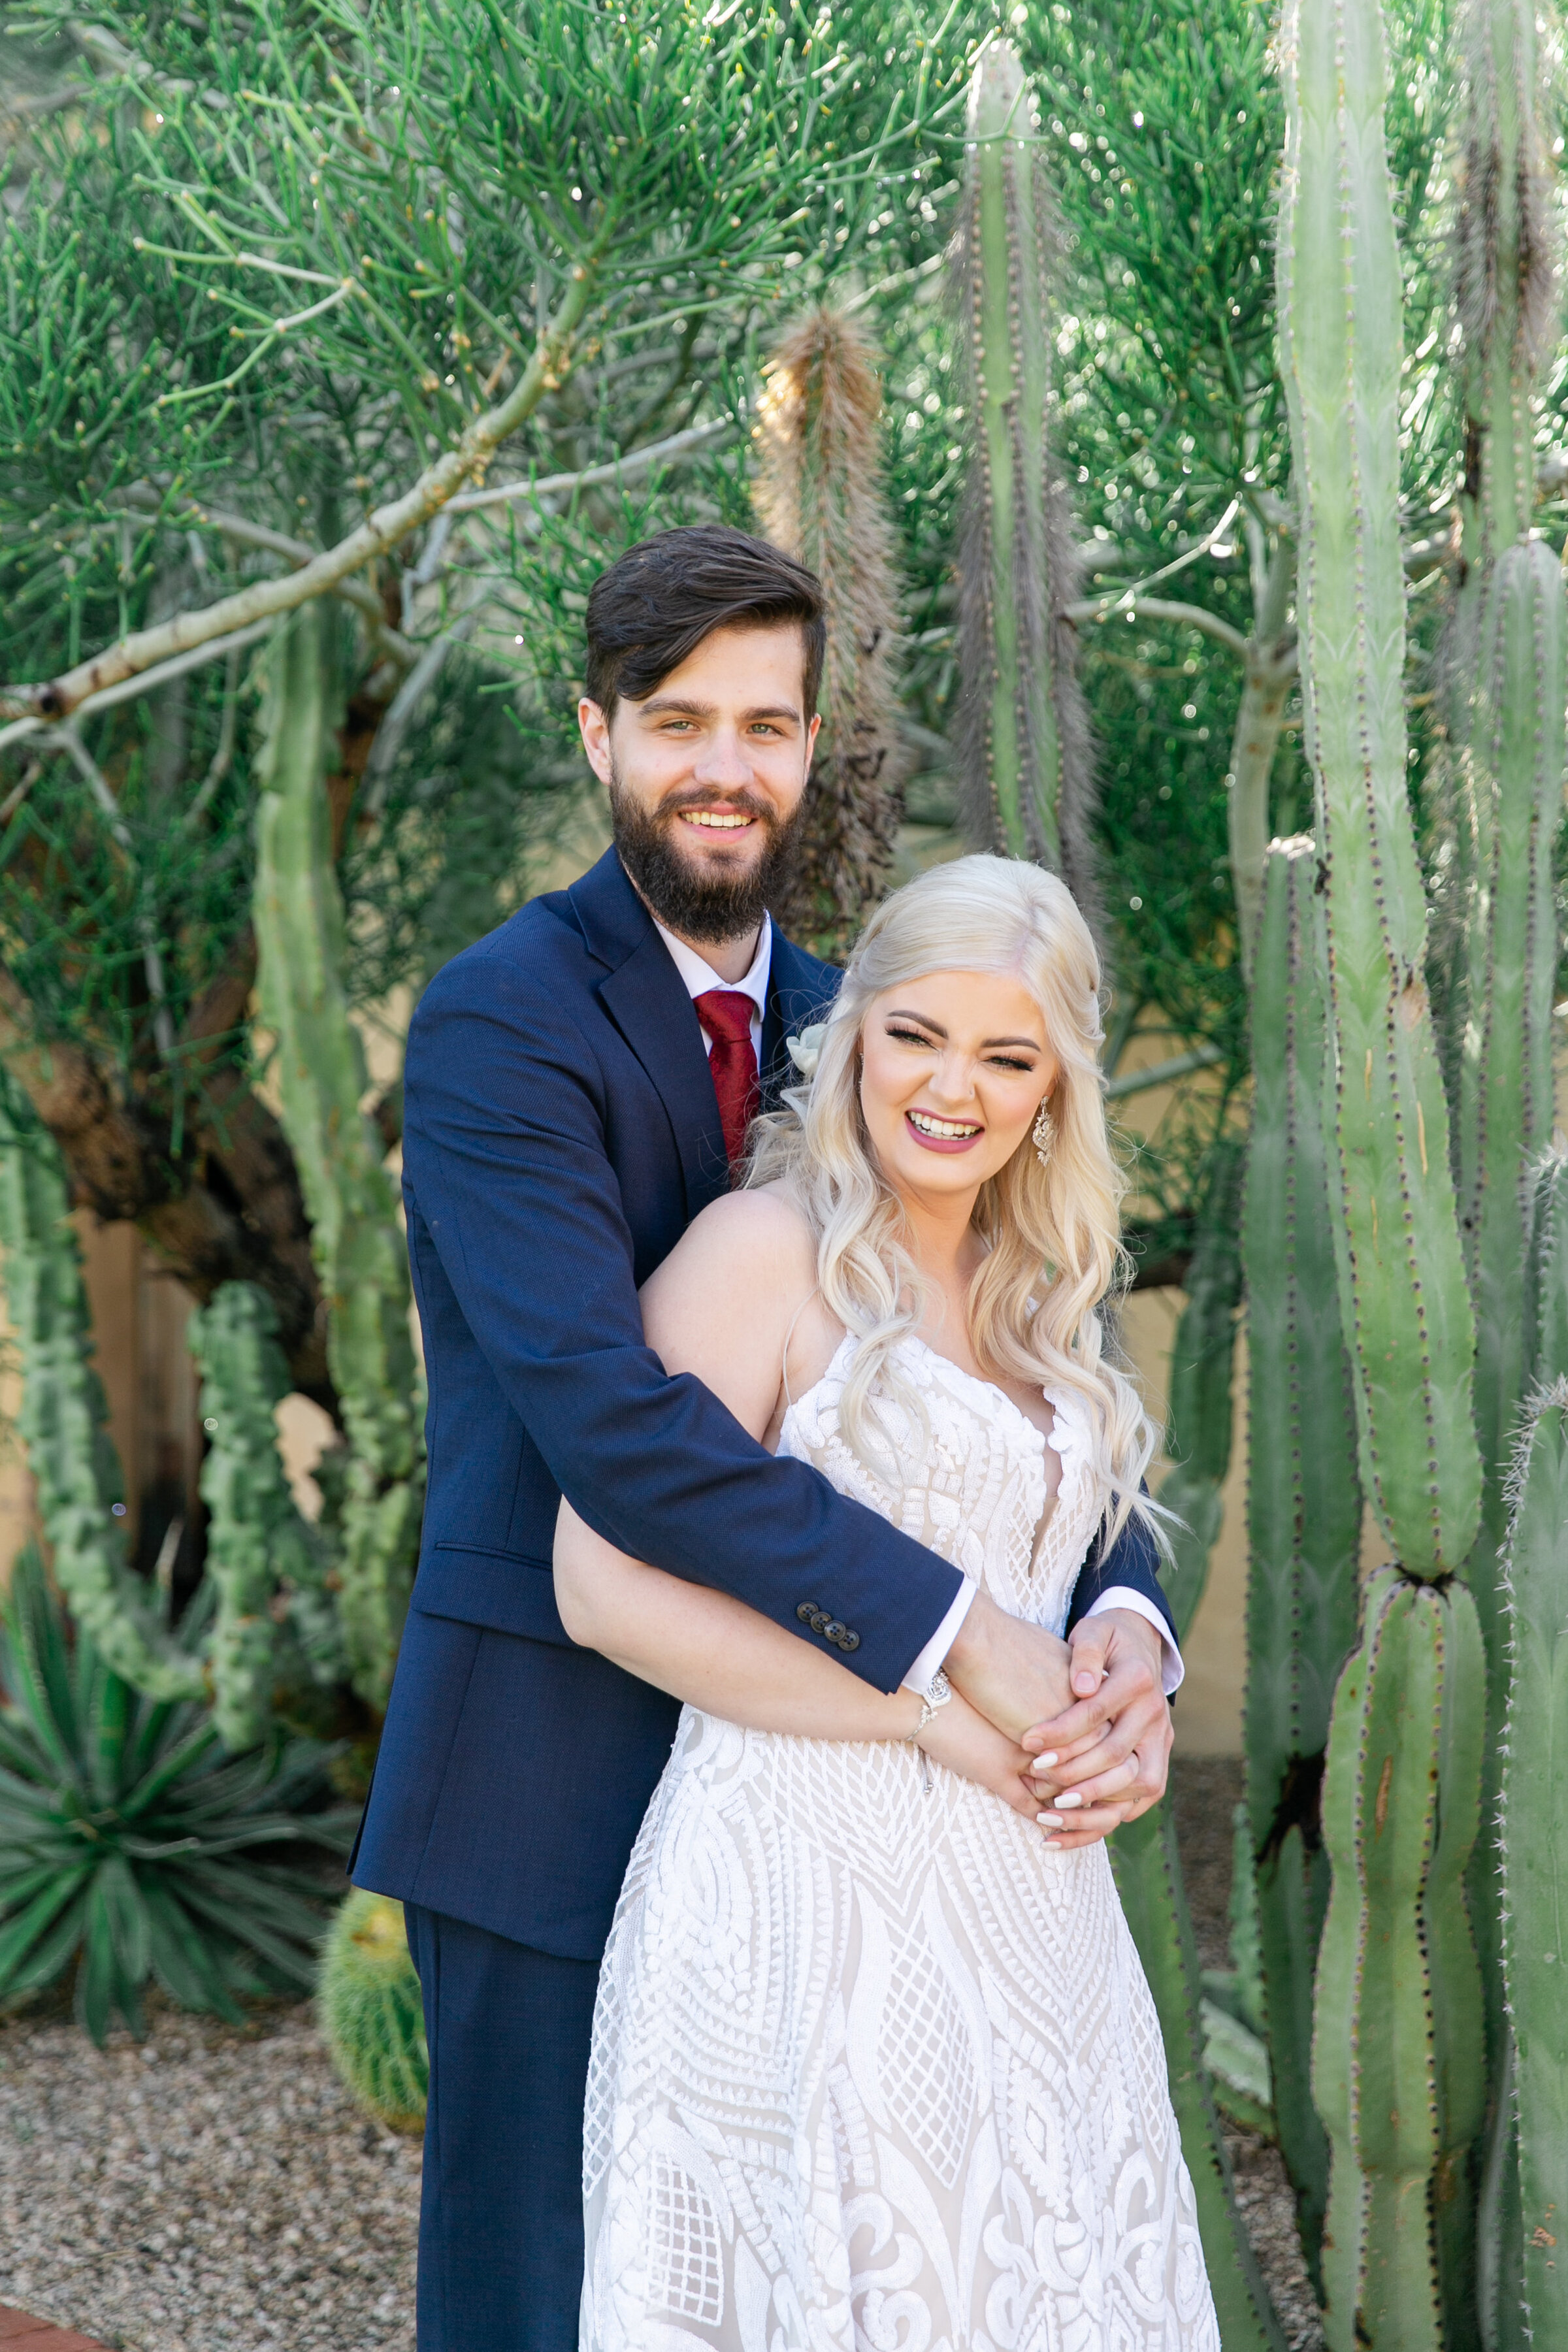 Karlie Colleen Photography - The Royal Palms Wedding - Some Like It Classic - Alex & Sam-161